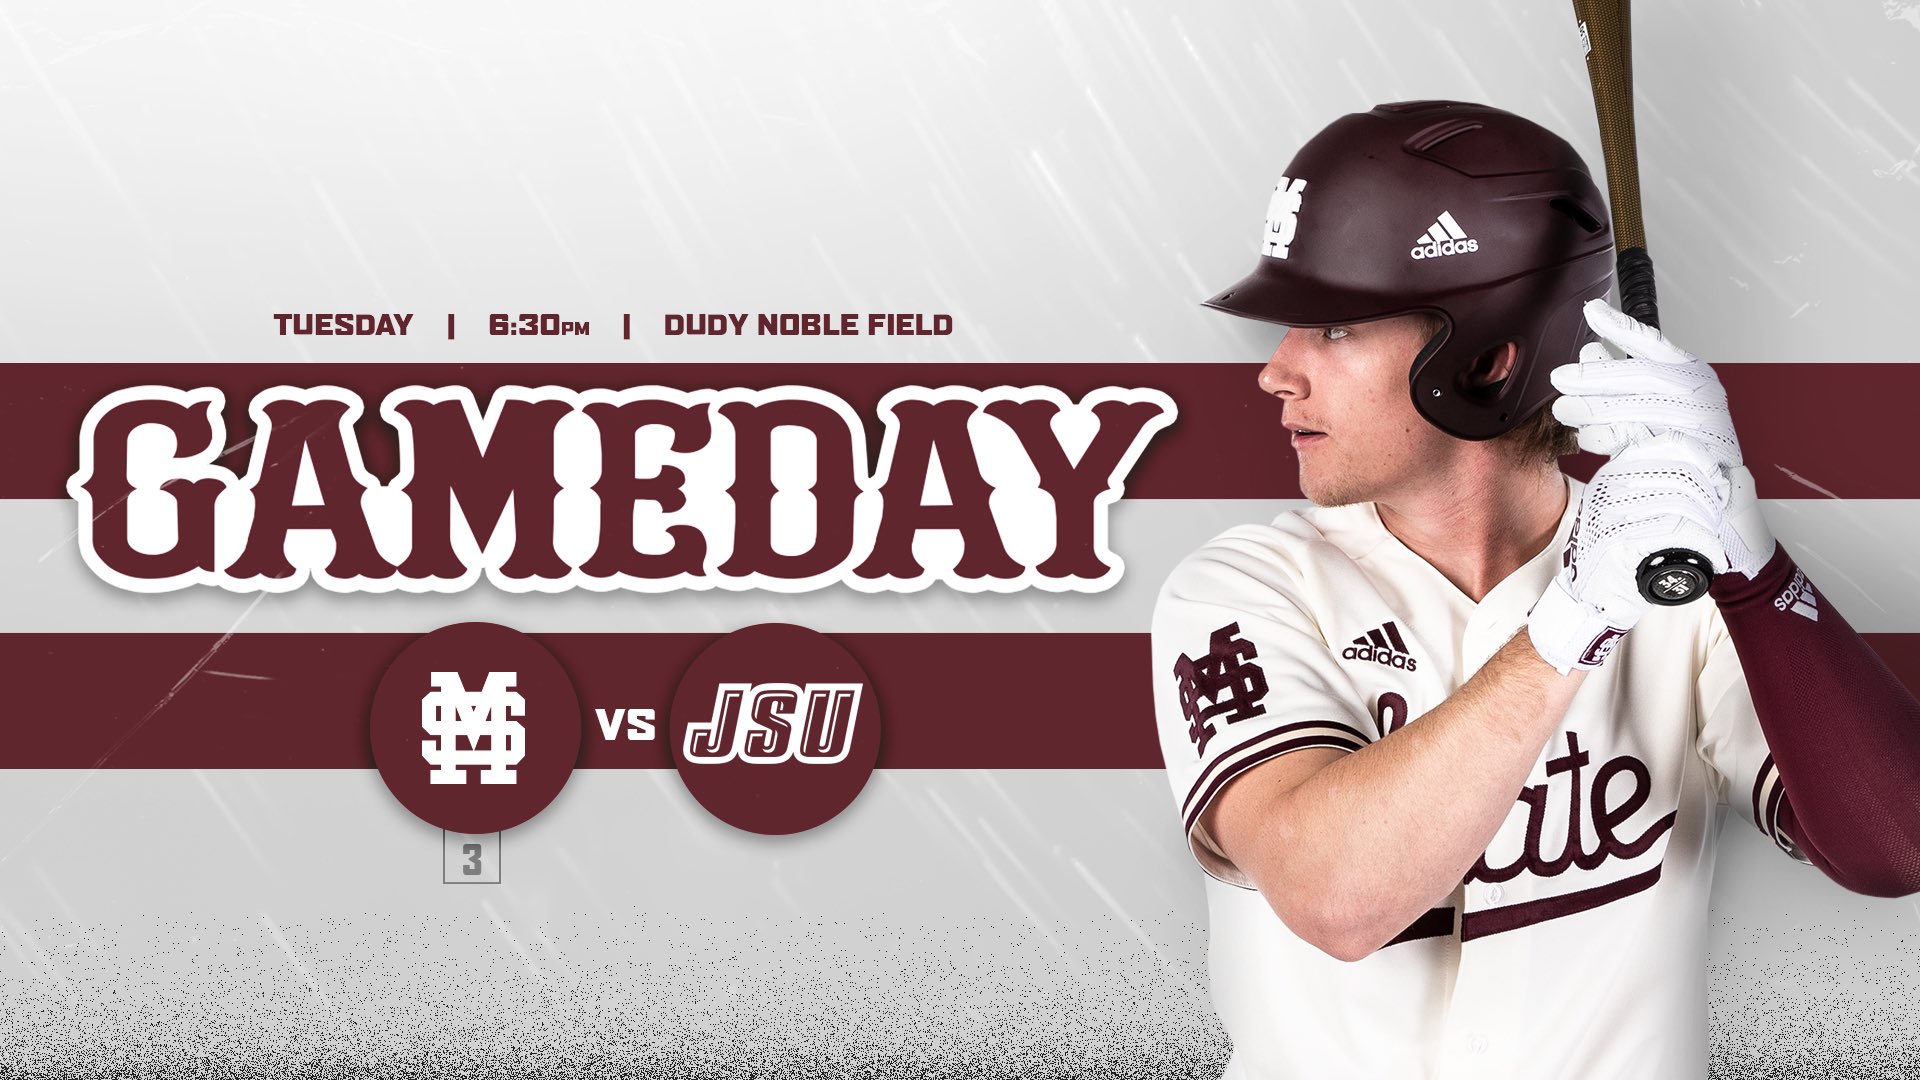 Maroon, white and gray gameday graphic with image of MSU baseball player Rowdey Jordan looking to the left while holding a bat in the air